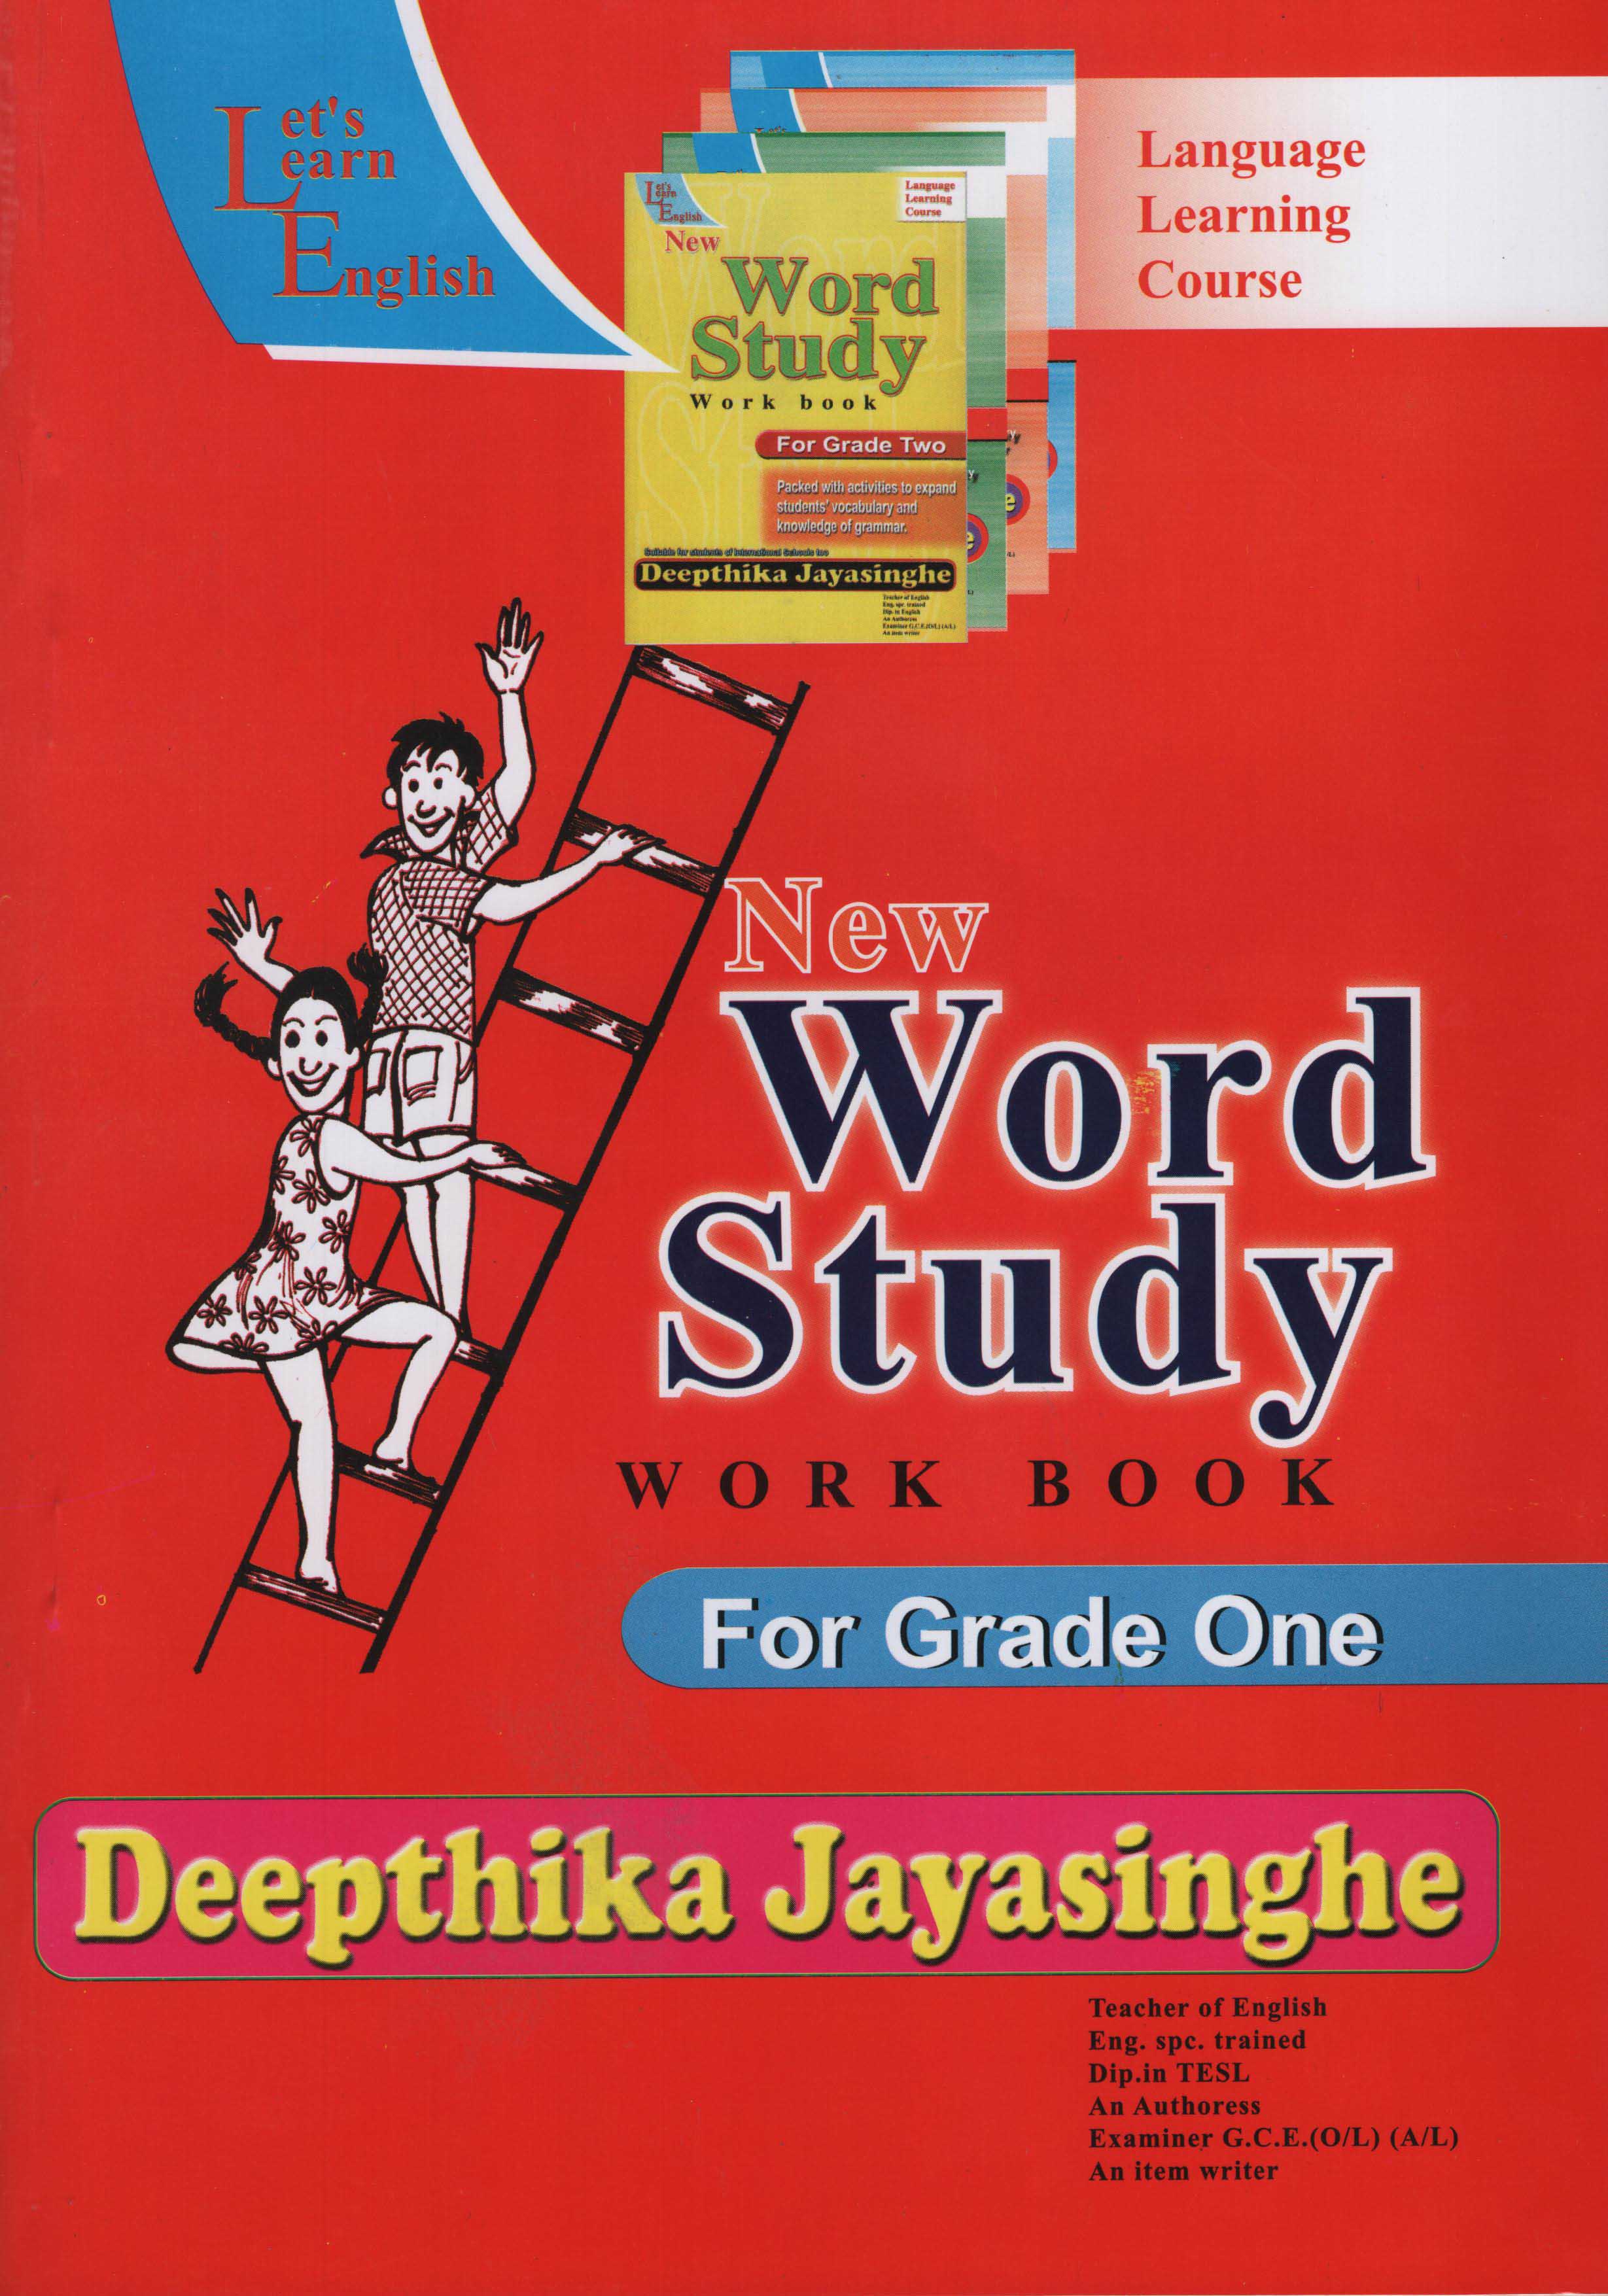 New Word Study Work Book For Grade One